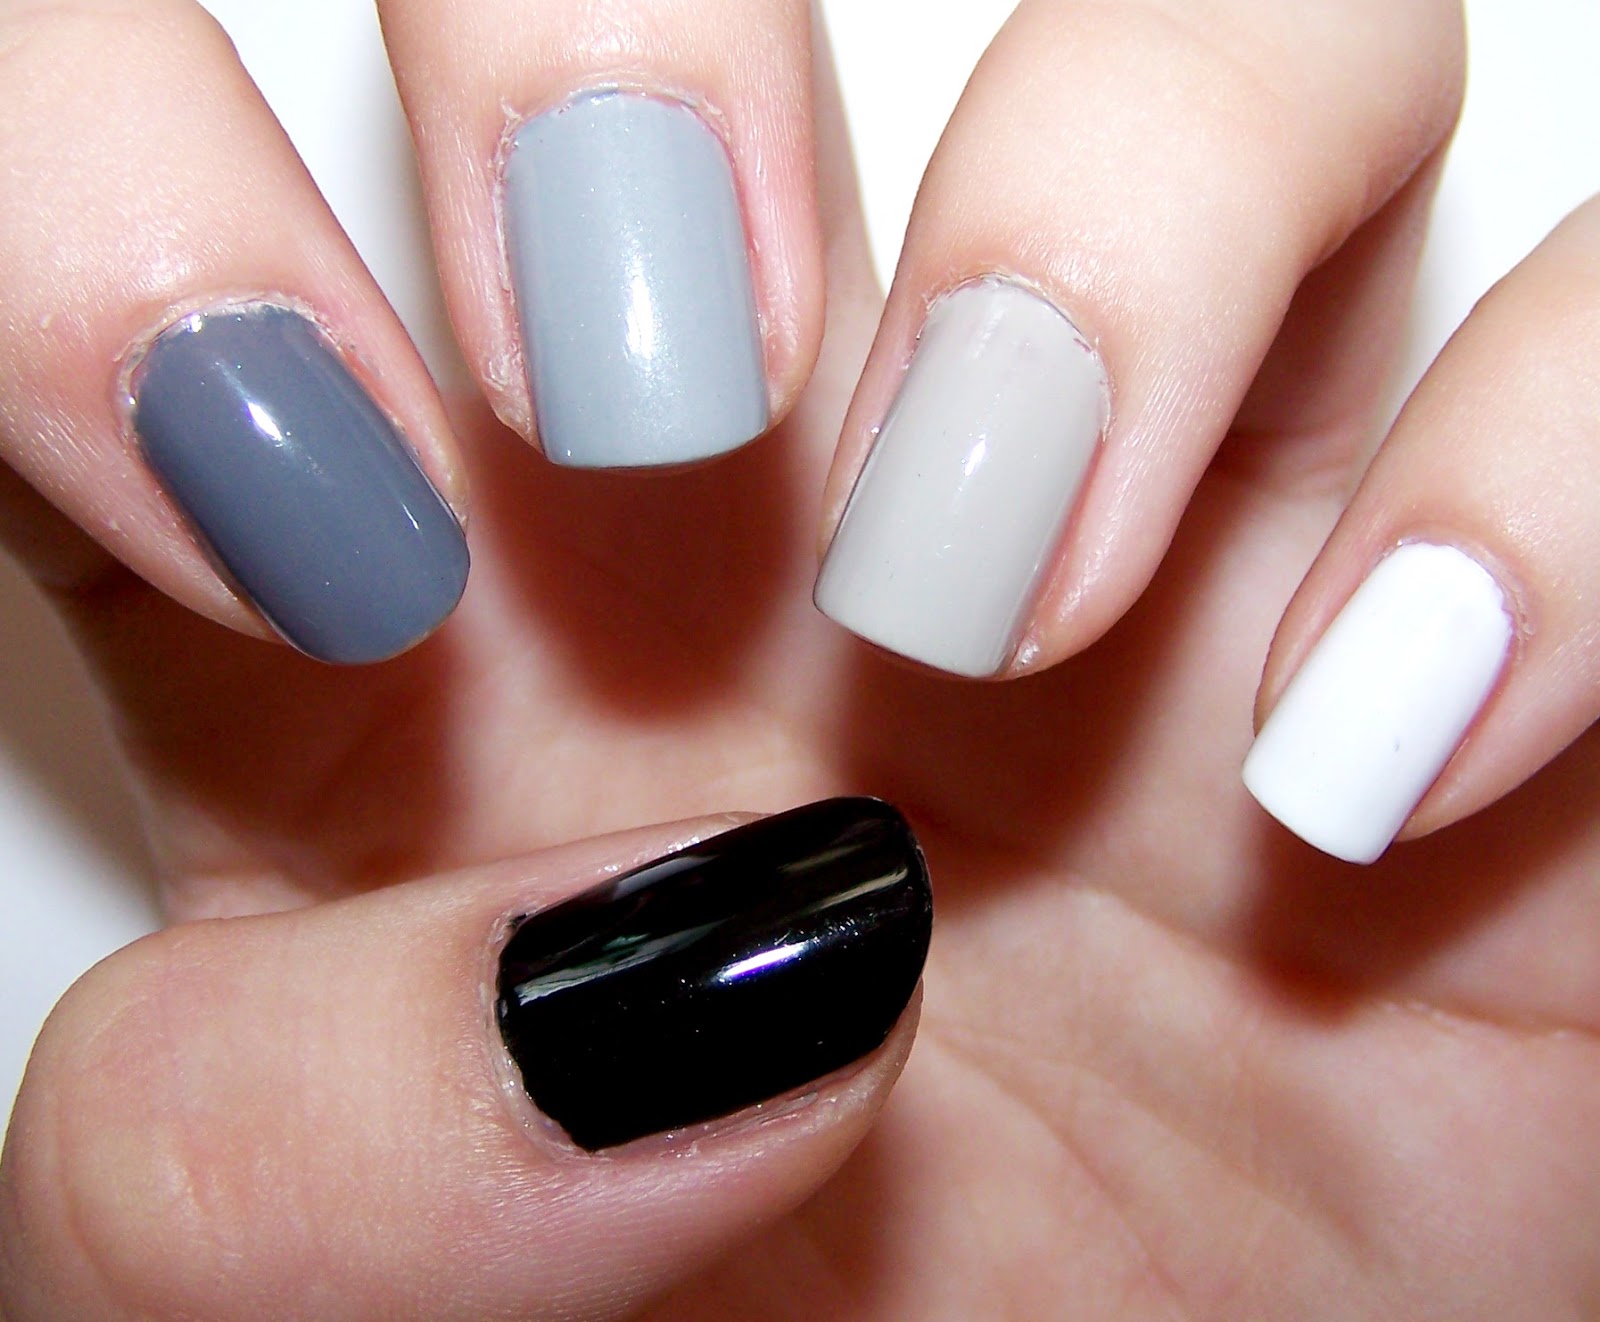 4. Black and White Ombre Nails - wide 5